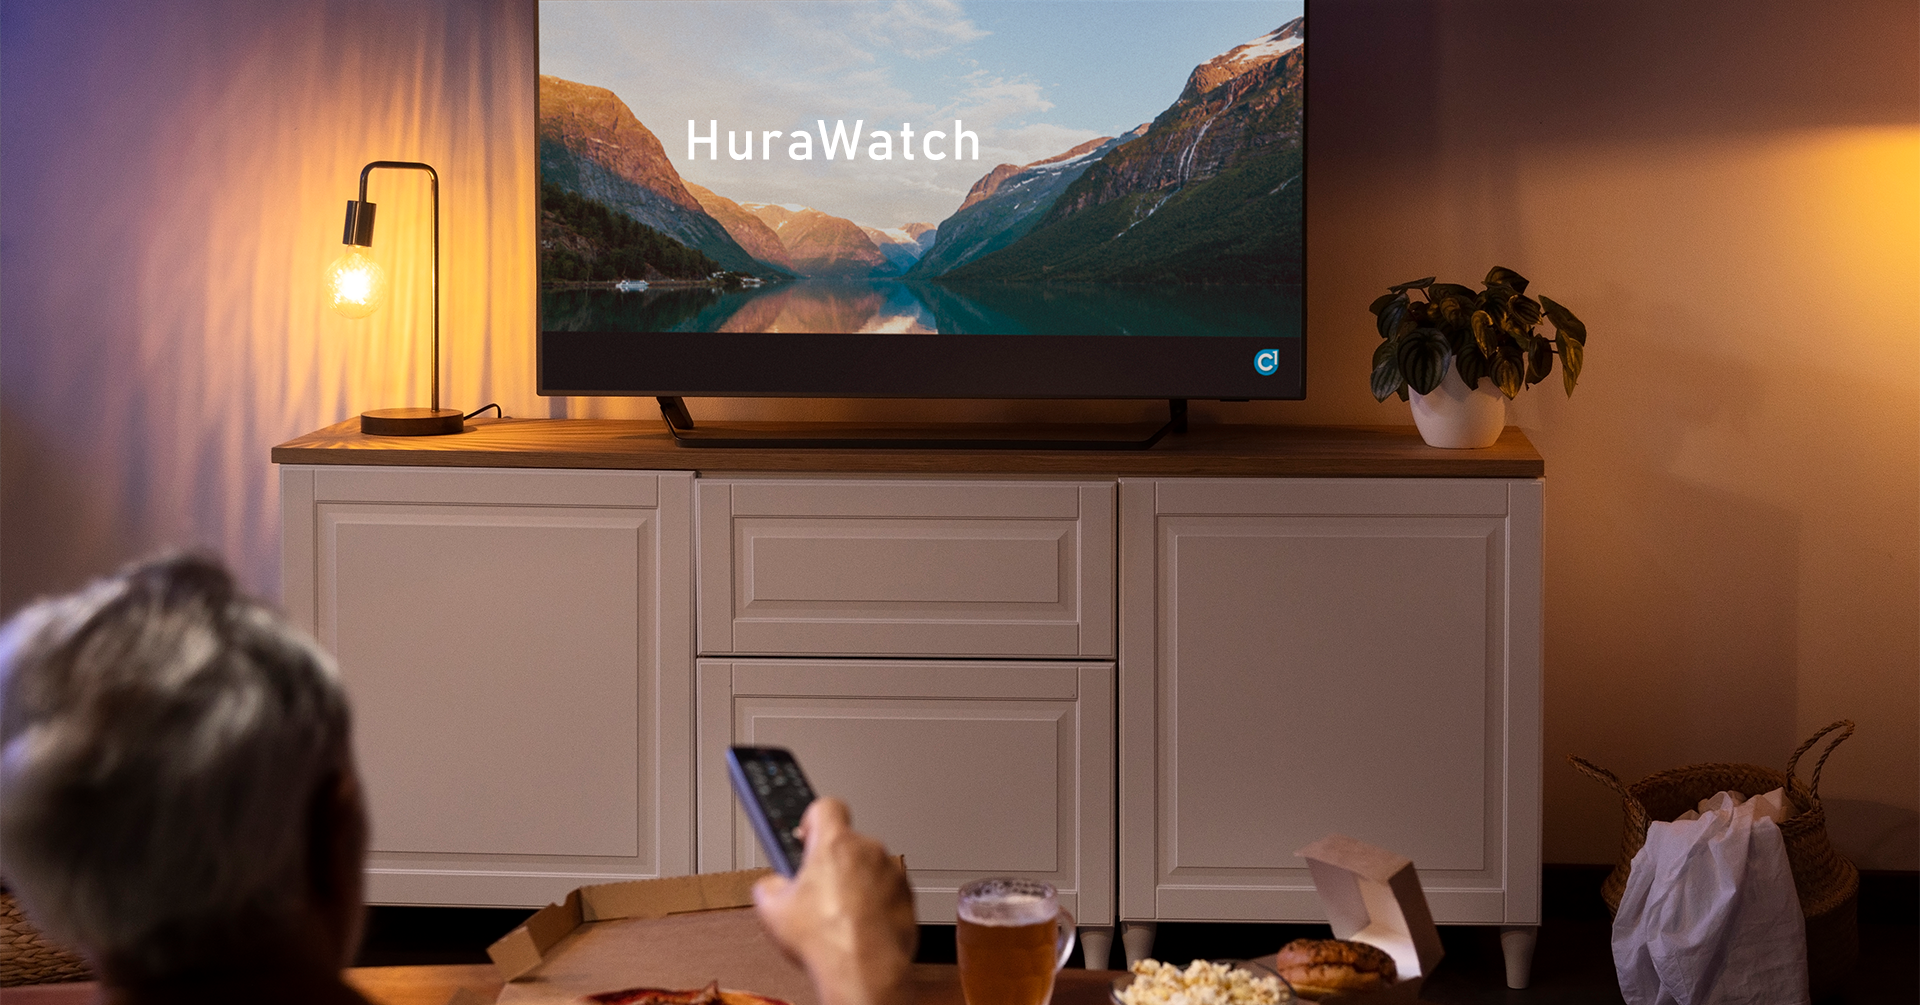 A person in a cozy living room setting, using a remote to access "HuraWatch" on a large screen TV.